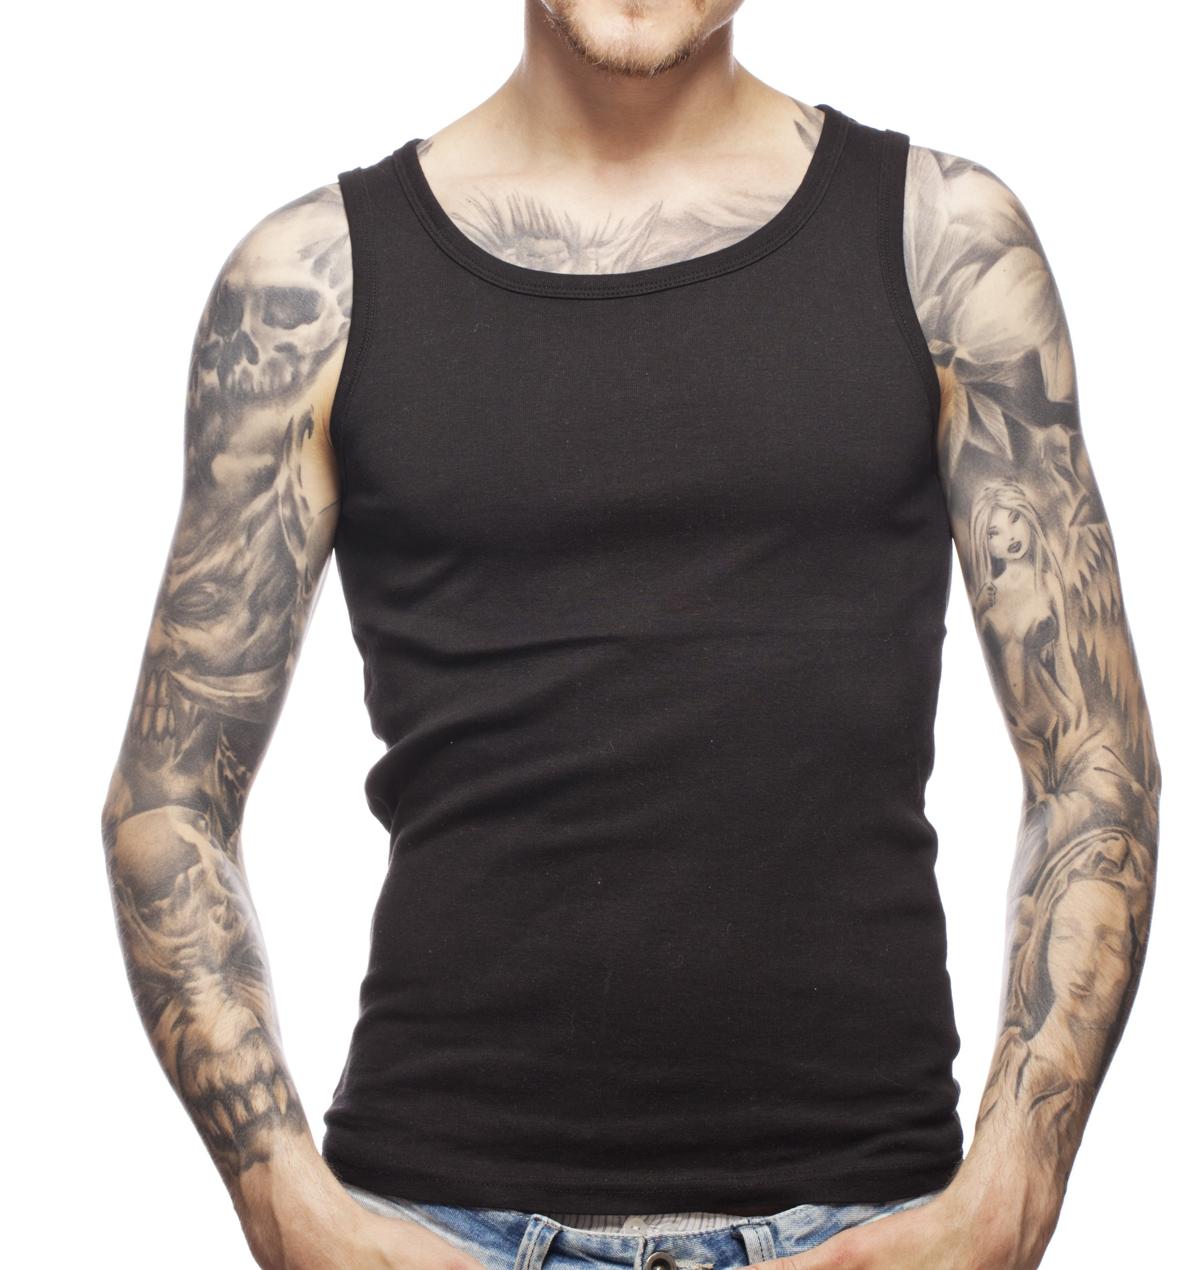 These Sleeve Tattoo Designs for Men are Actually Very Impressive ...